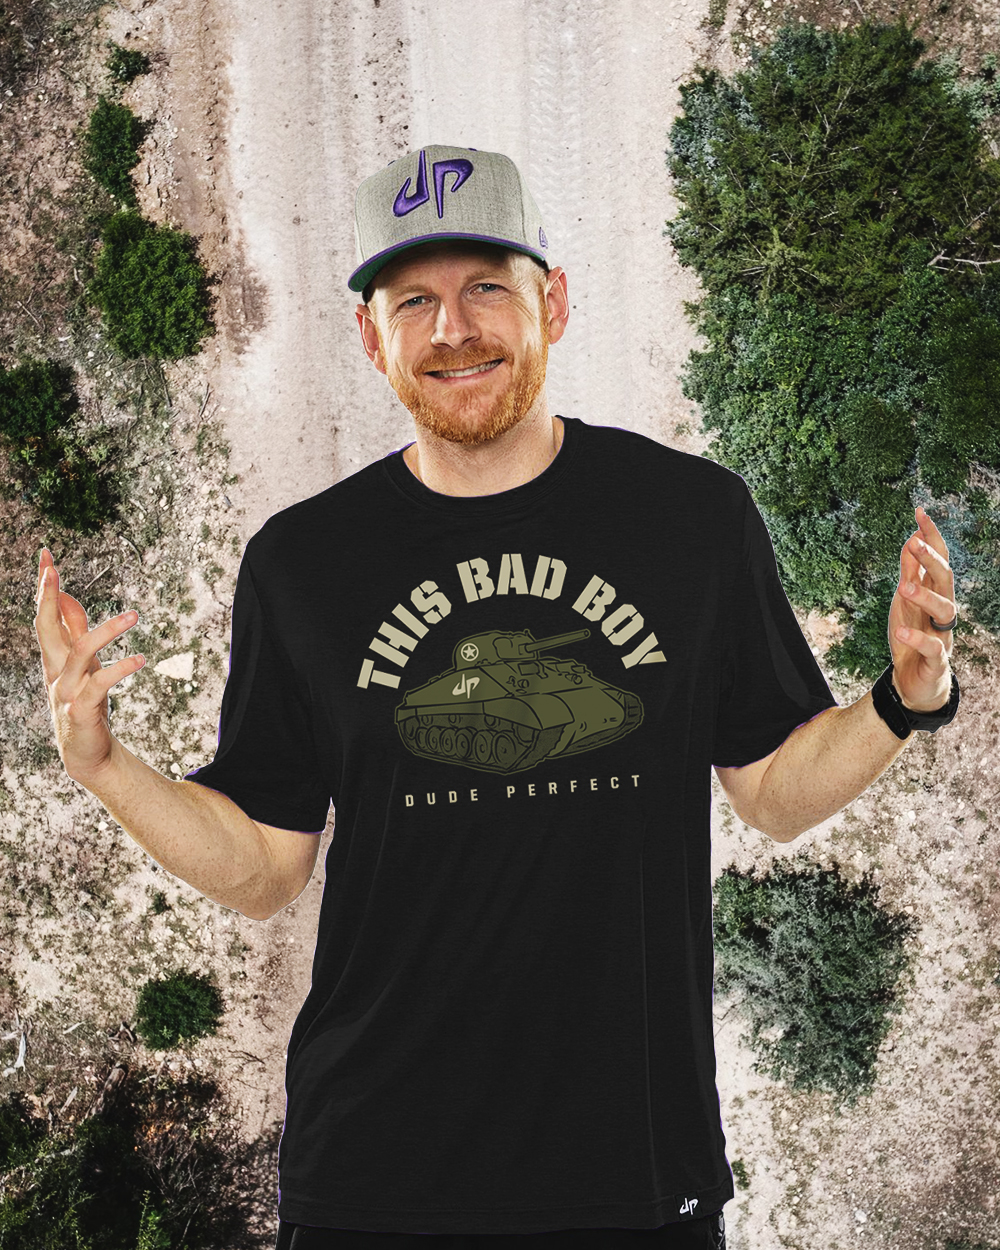 Anoi montering Kemiker Dude Perfect on Twitter: "It had to be done. Garrett is a t-shirt quote  making MACHINE. Get your This Bad Boy merch (limited quantities available)  &gt;&gt; https://t.co/wD9CxE8lTB https://t.co/FbM1r4Da0F" / Twitter